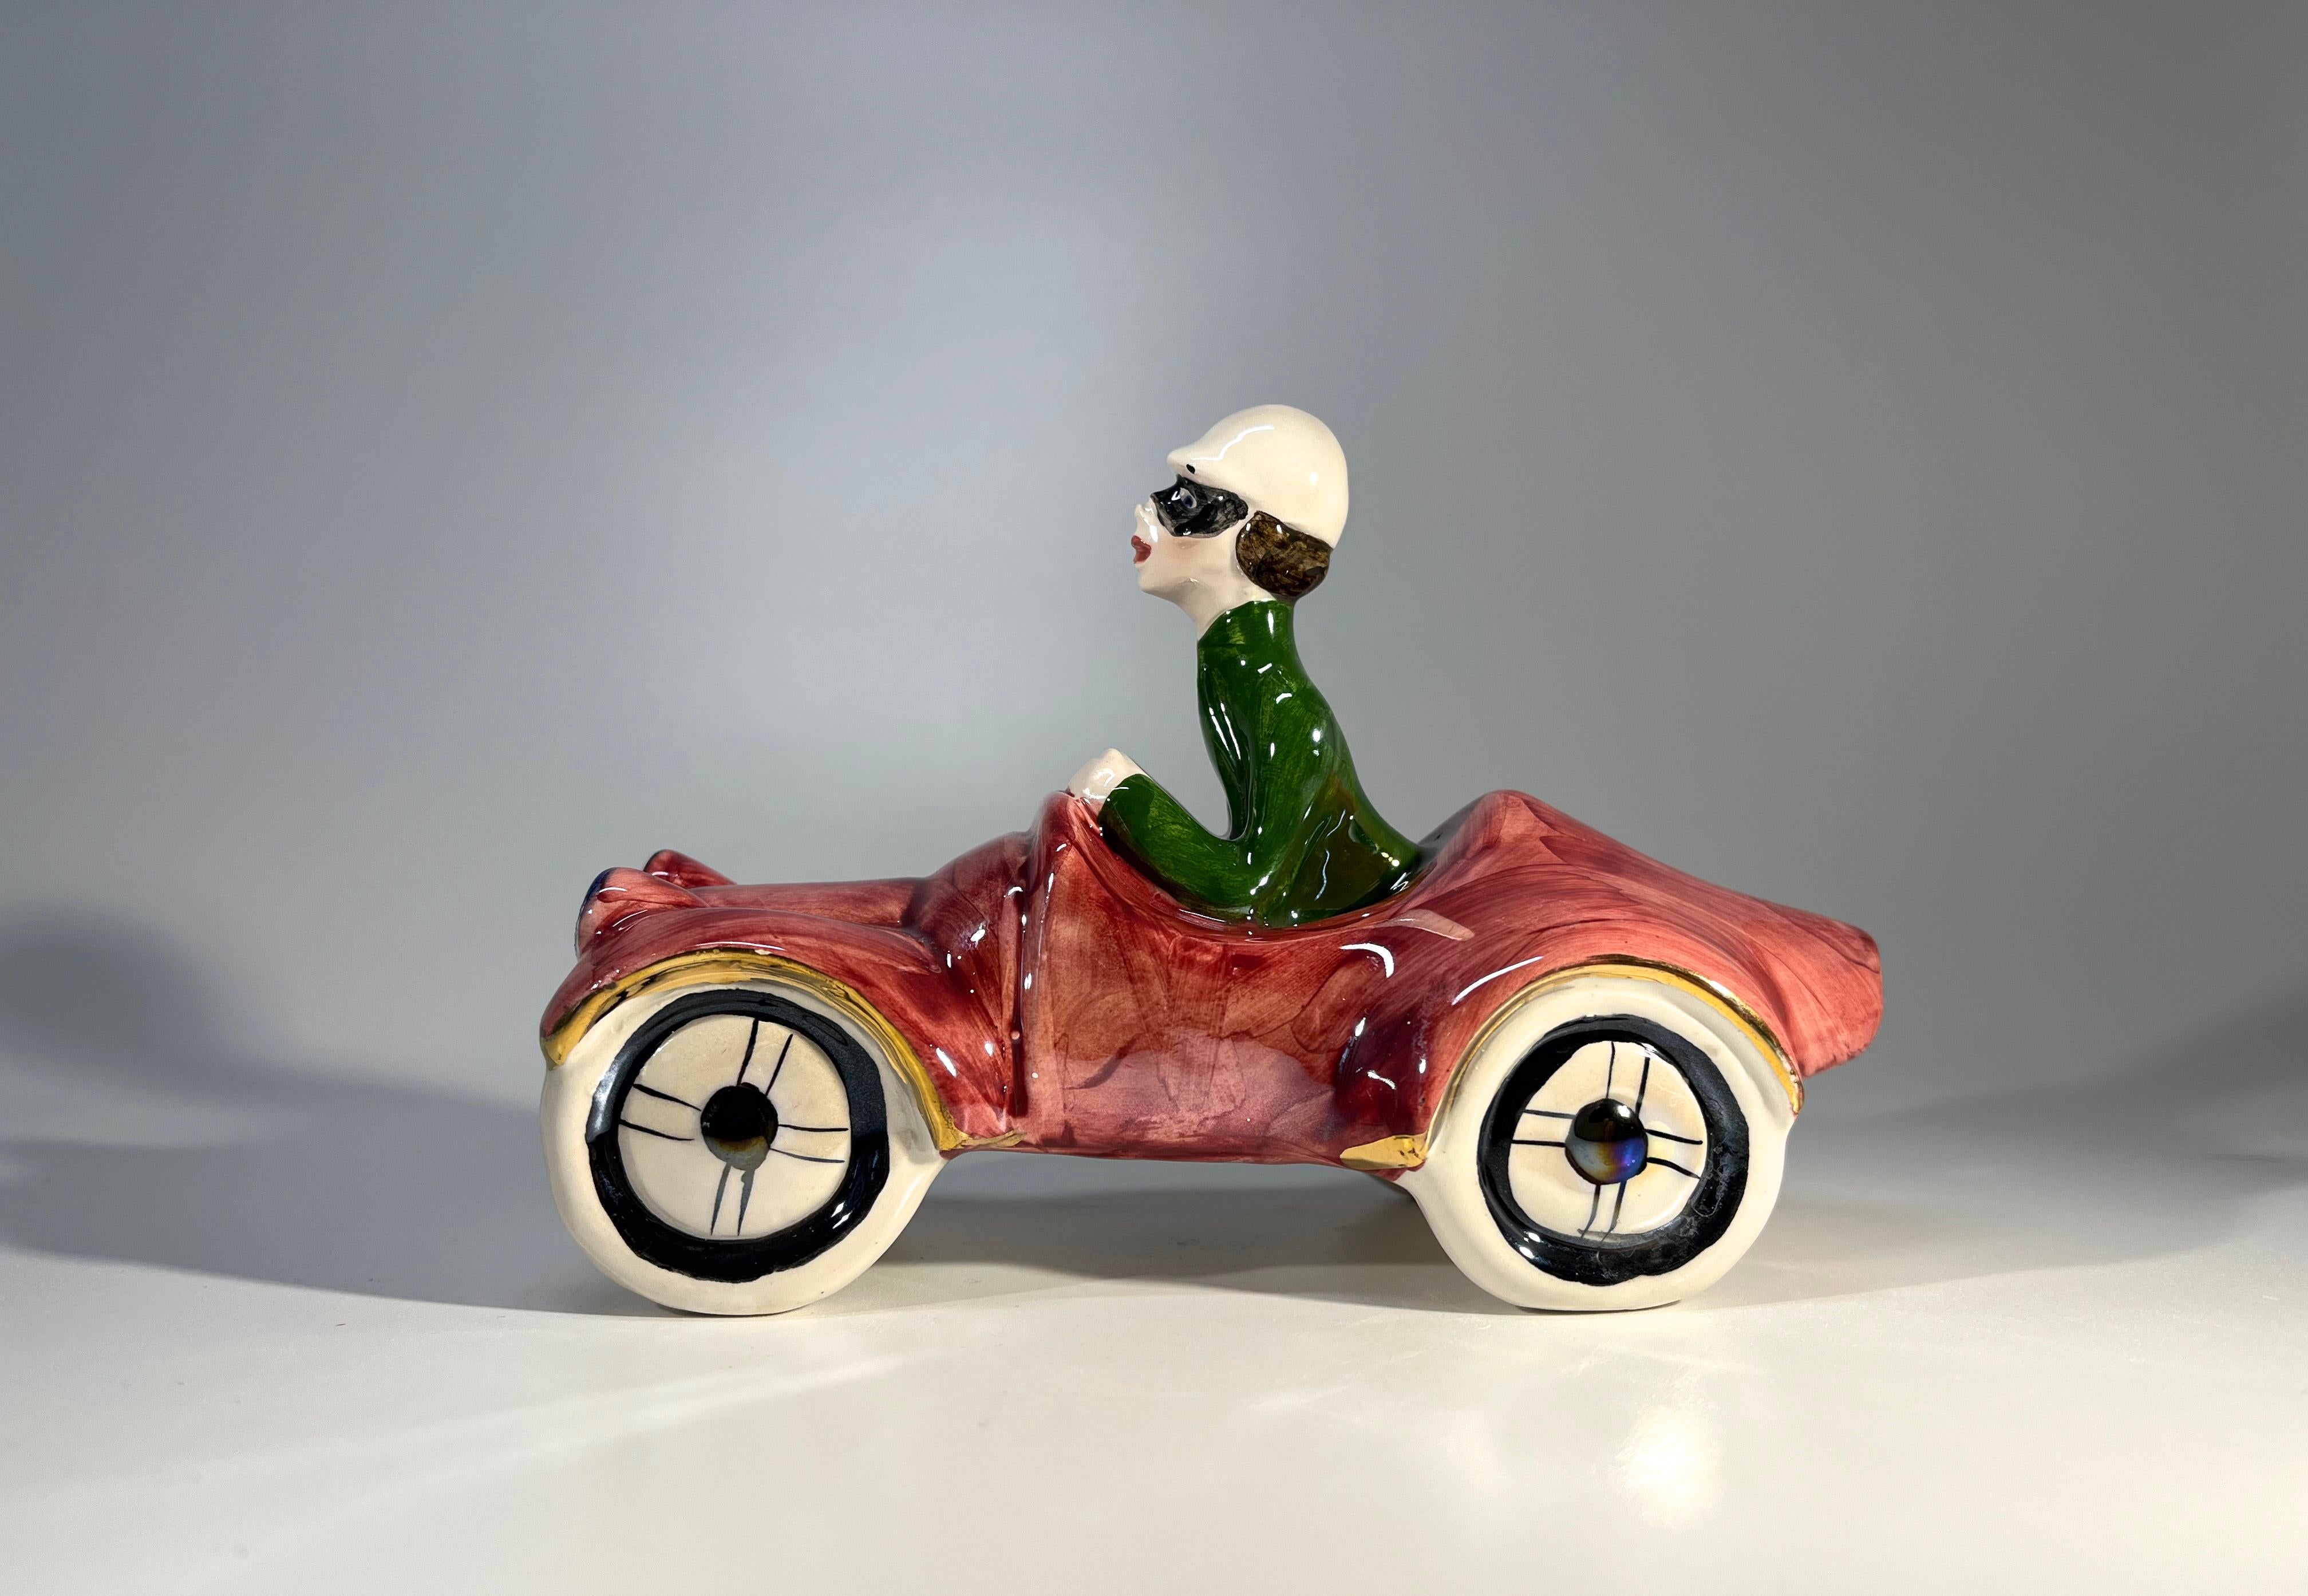 Italian ceramic car and driver from the 1960's, a fun piece of Italian kitsch
Rossa pink lustre glaze - beautifully respected
Circa 1960's
Signed Italy
Height 4 inch, Width 6 inch, Depth 2.75 inch
In excellent condition
Wear consistent with age and